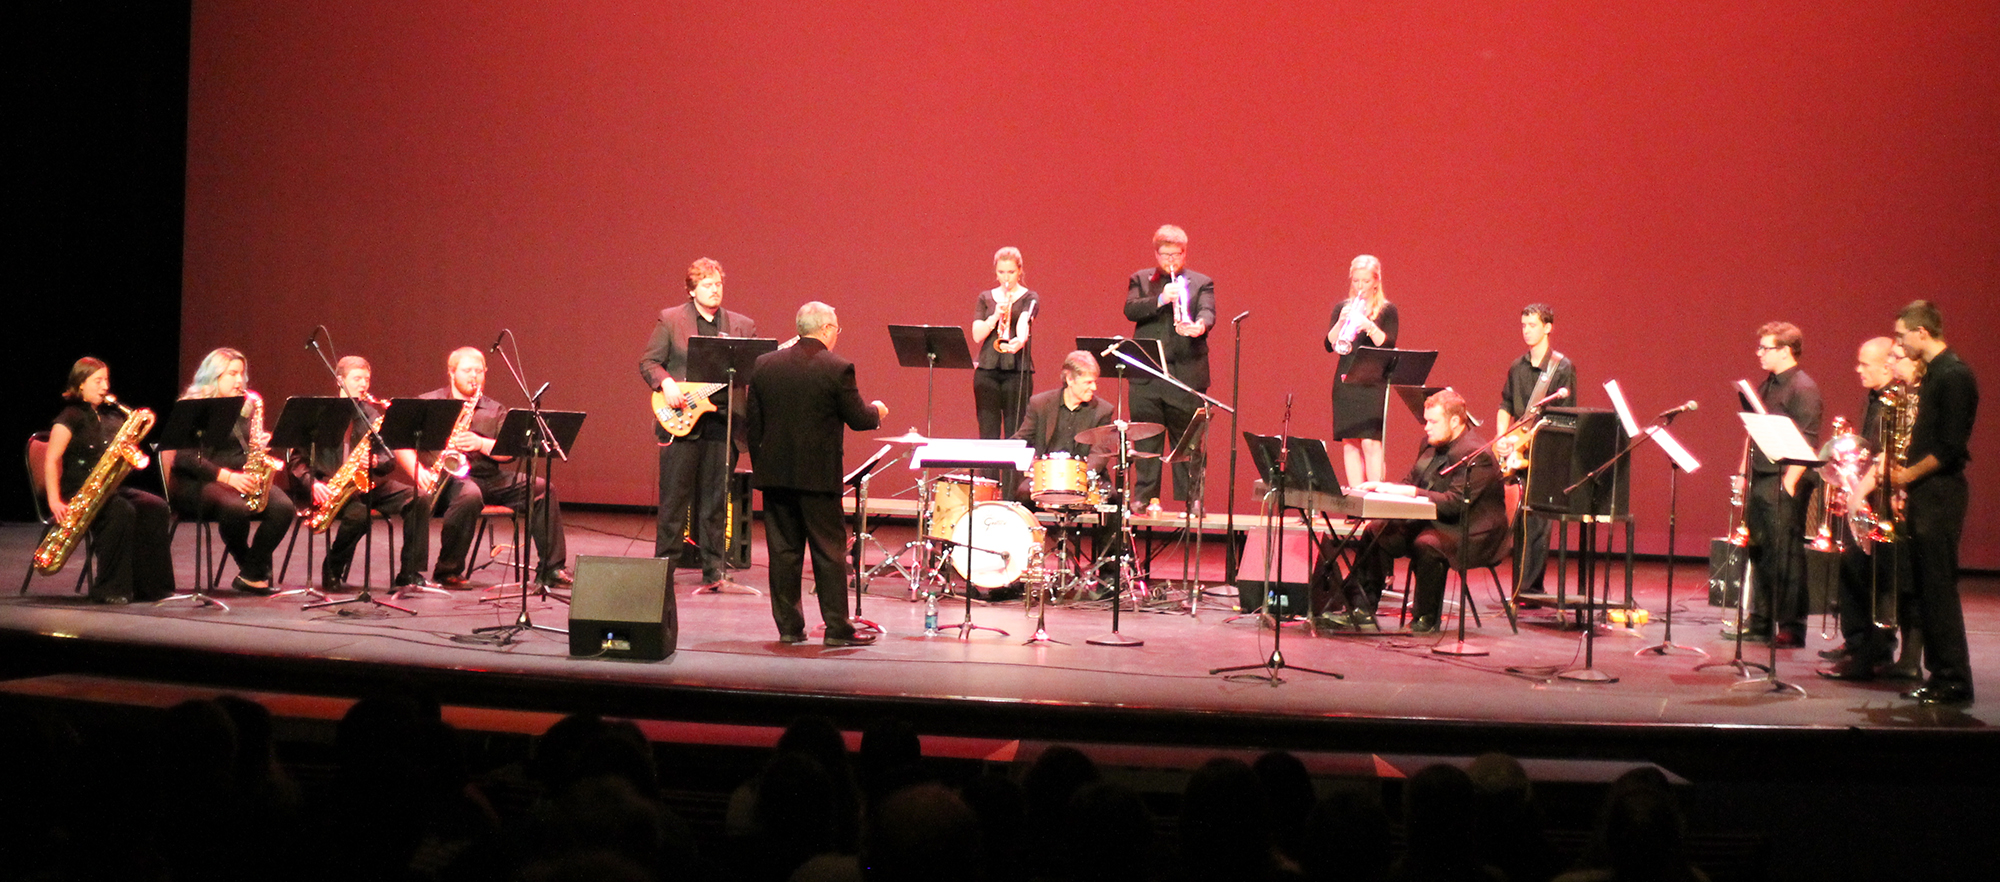 Ouachita to present joint concert featuring Ouachita Sounds and Jazz Band Feb. 28.